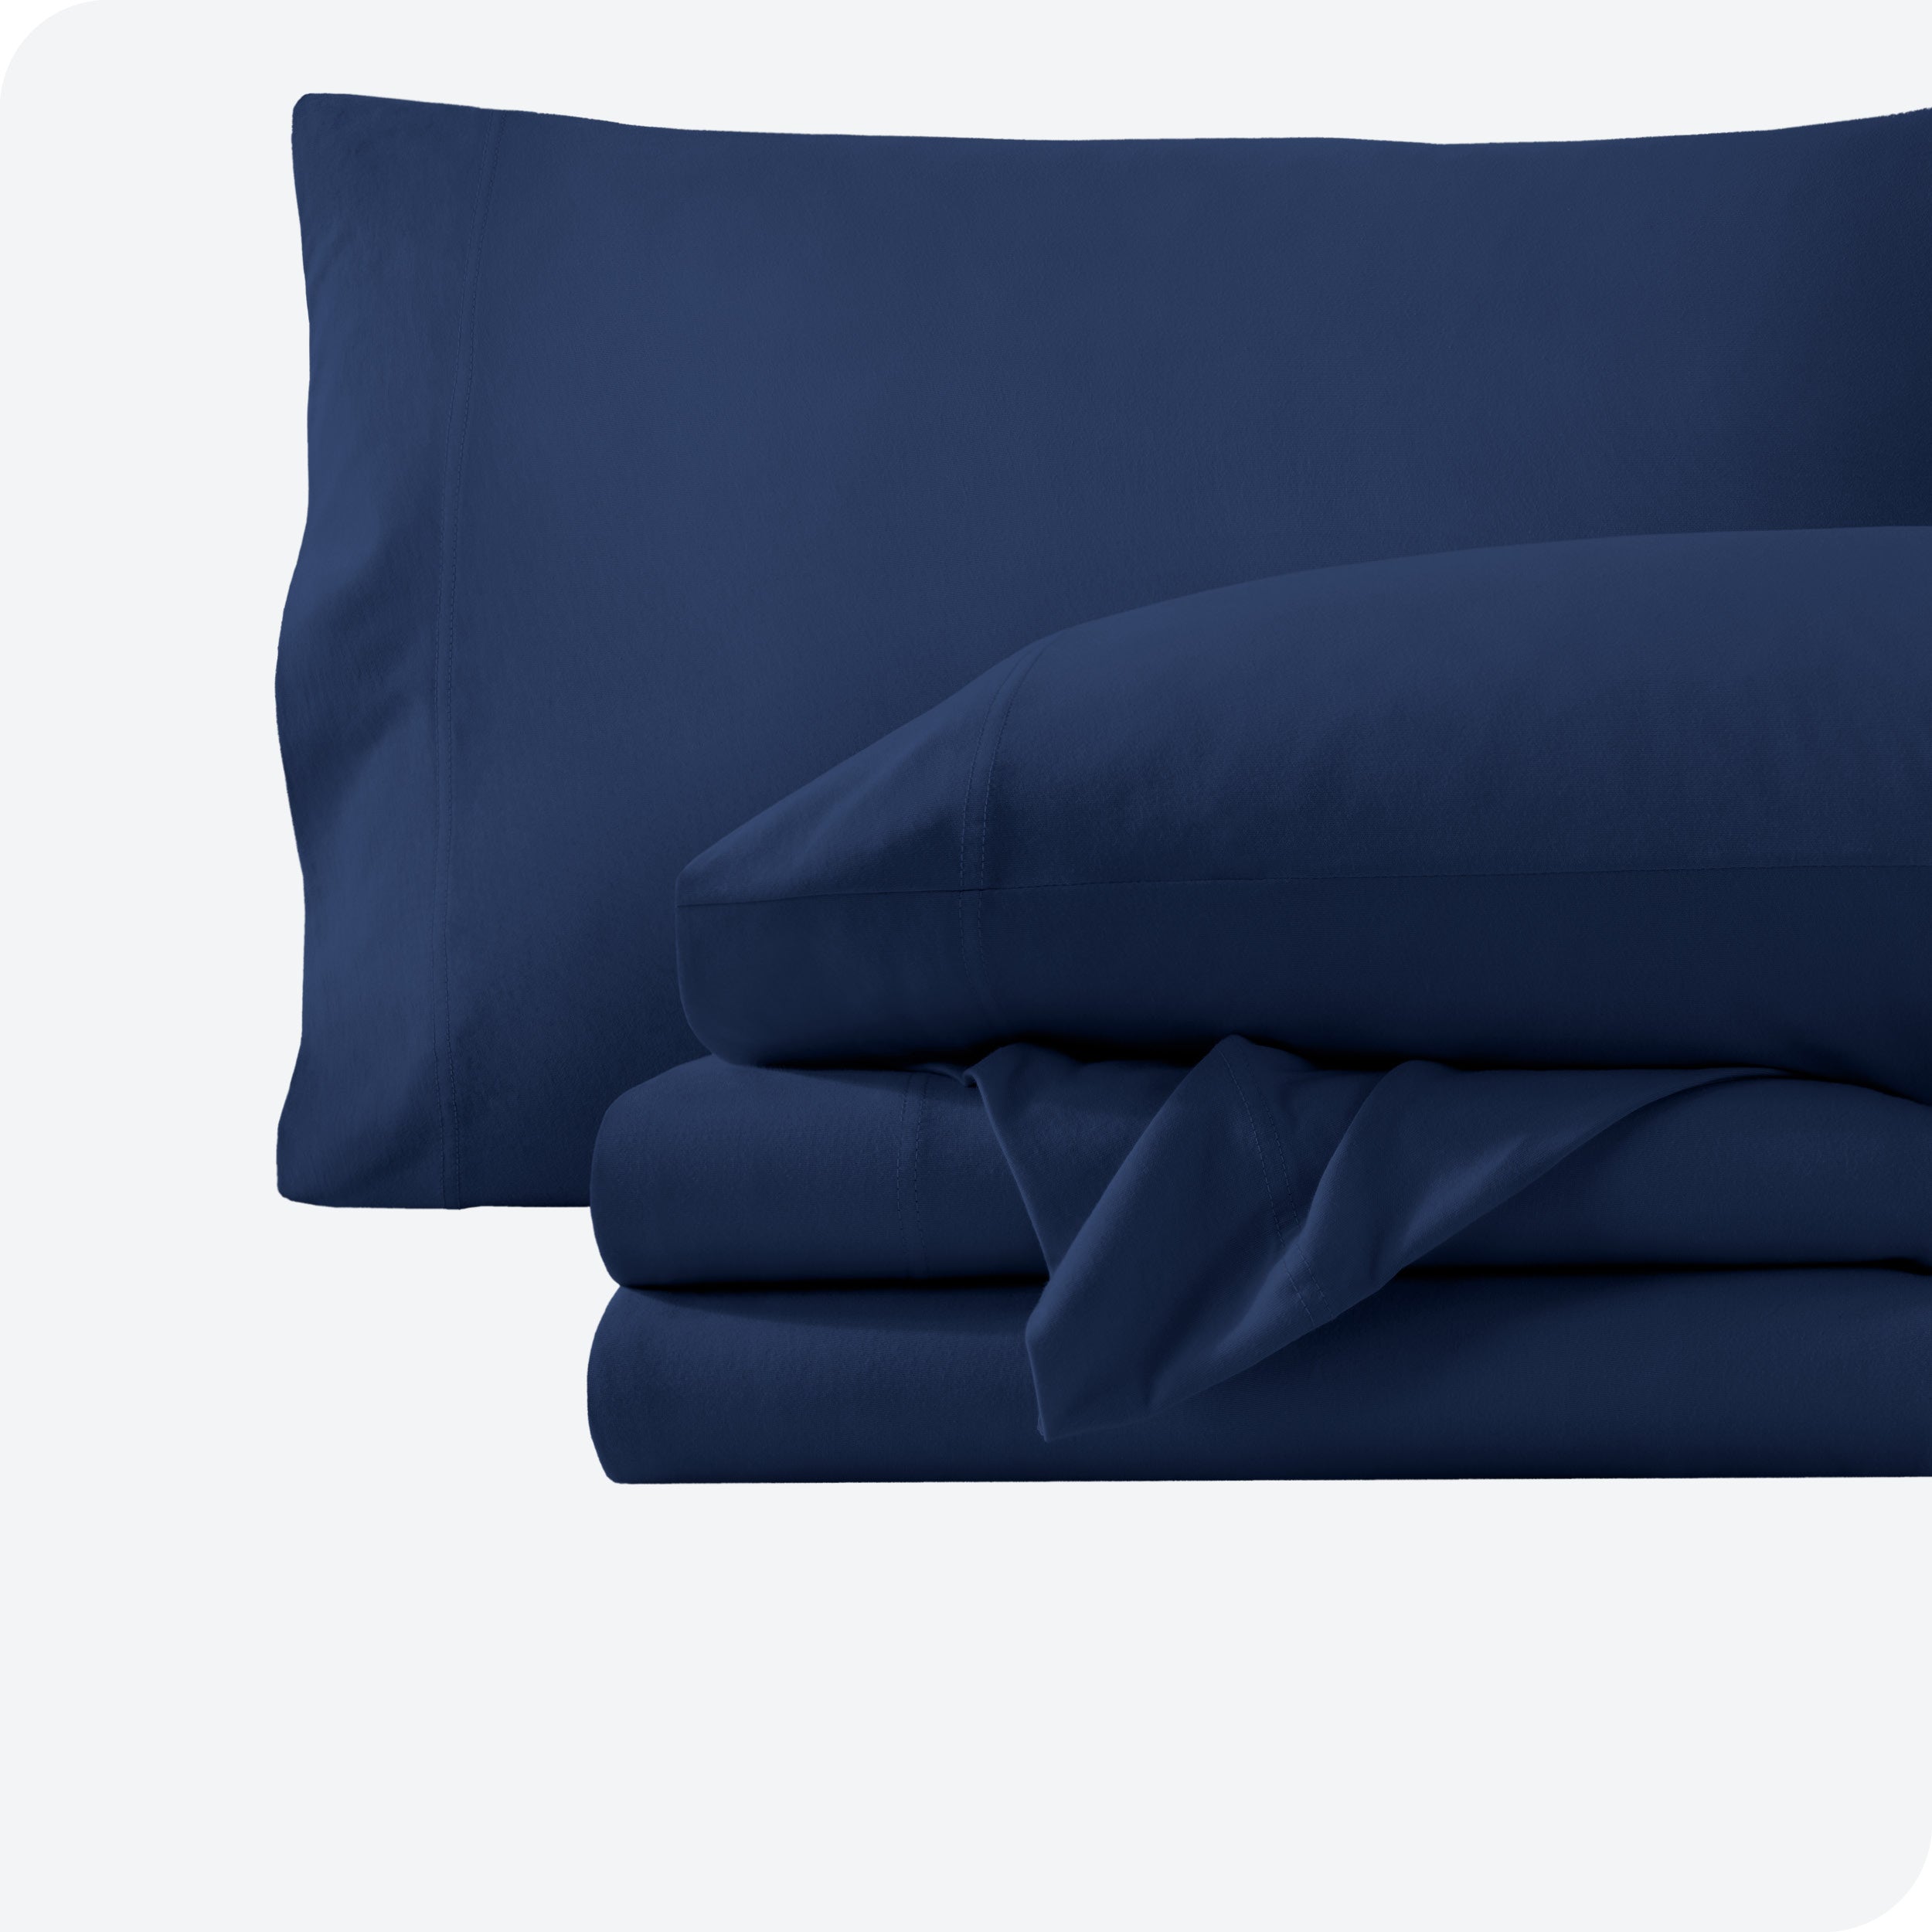 A dark blue sheet set folded and stacked